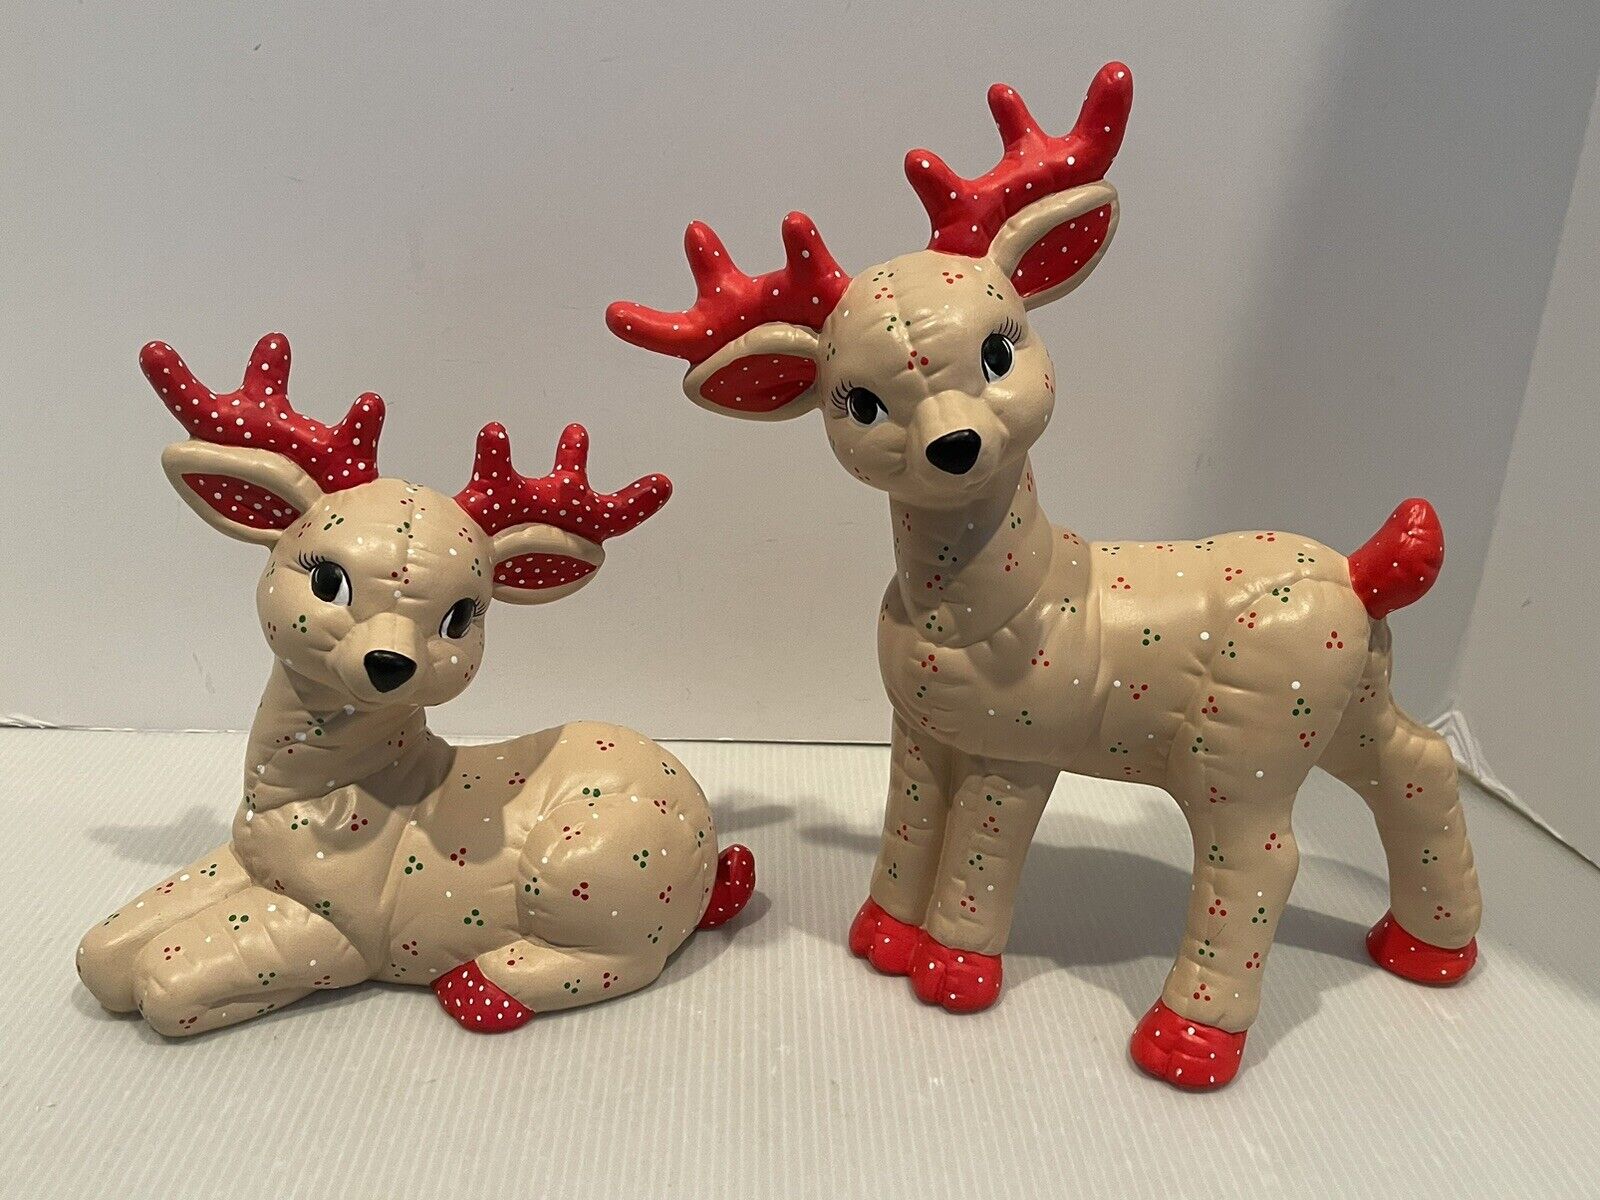 Vtg 80s Kimple Mold Christmas Ceramic Reindeer Figurines Quilted Hand Painted 2